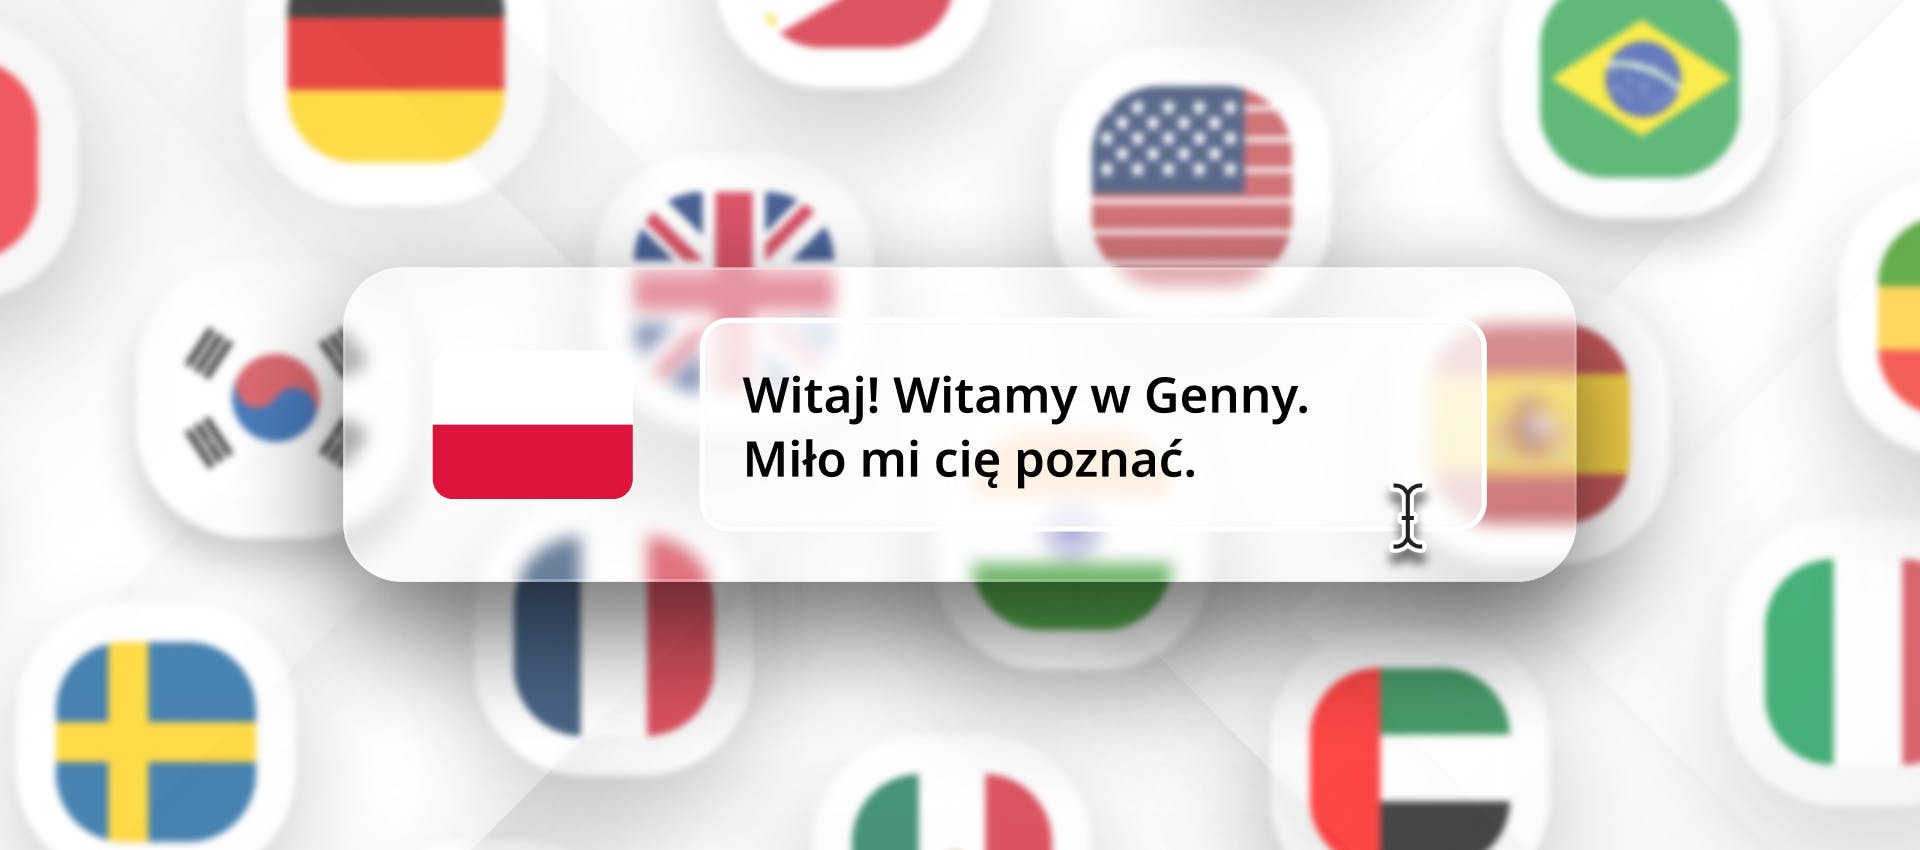 Polish phrase for Polish TTS generation with different flags in the background